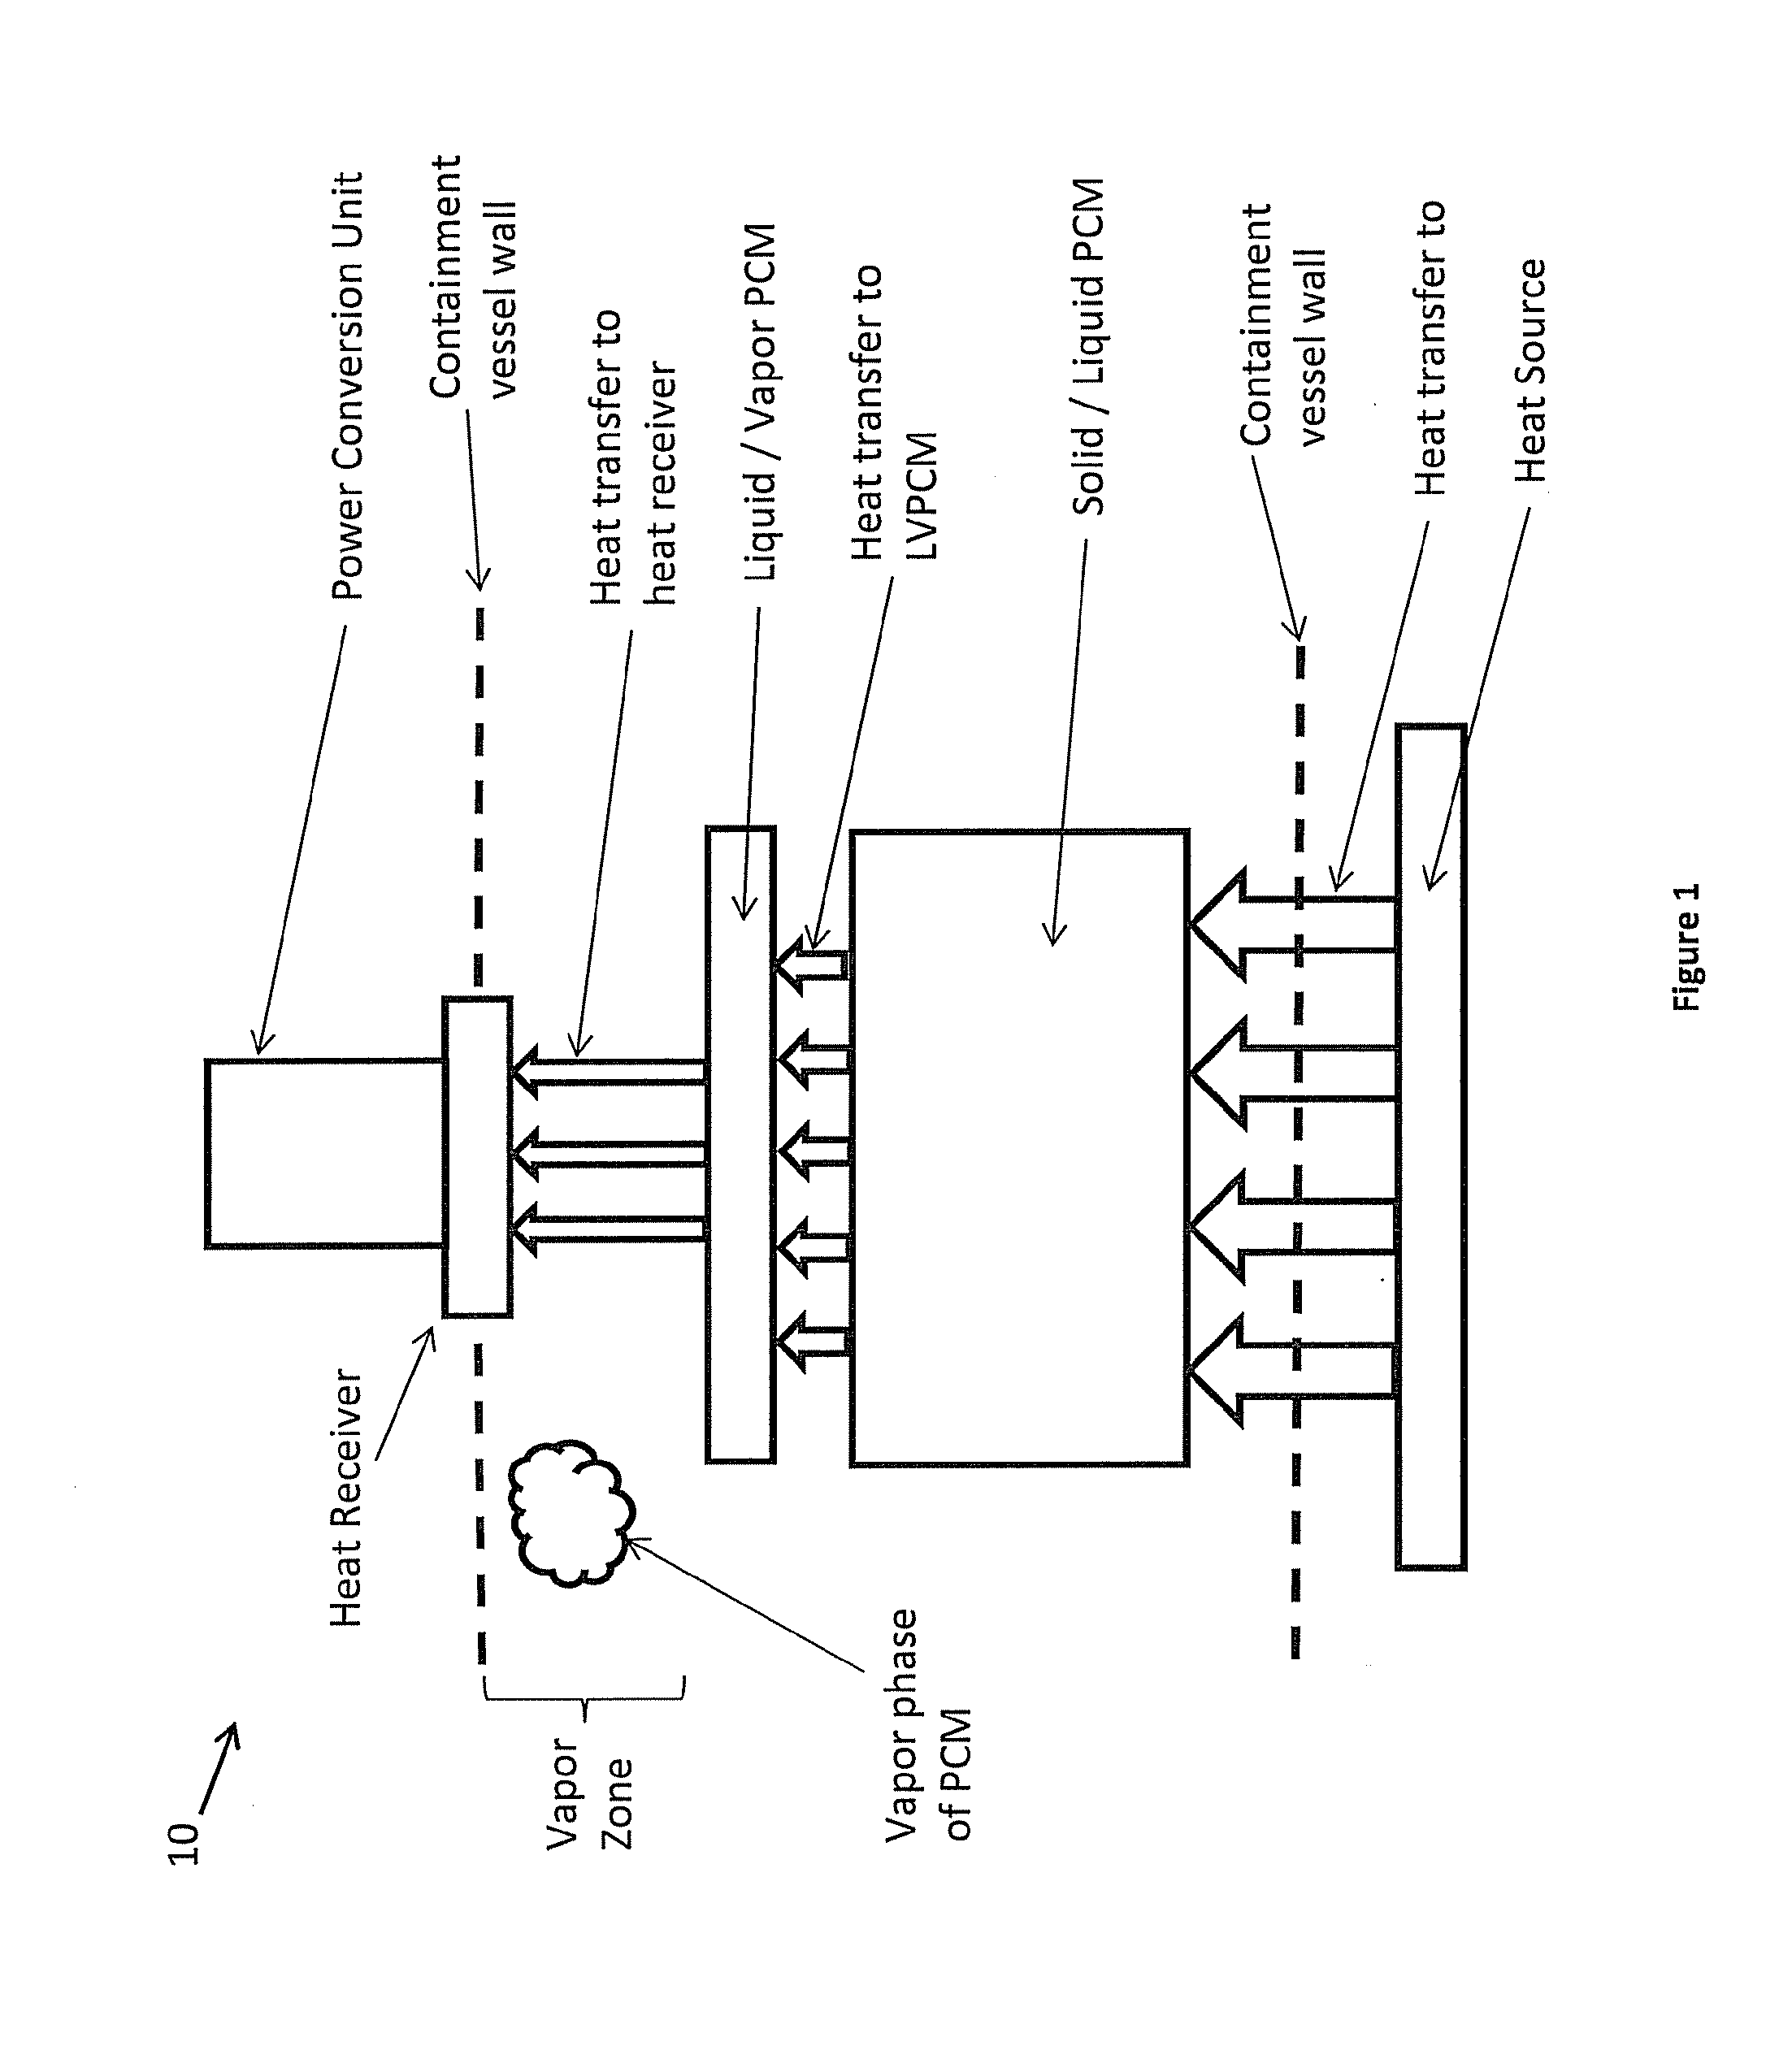 Systems, apparatus and methods for thermal energy storage, coupling and transfer